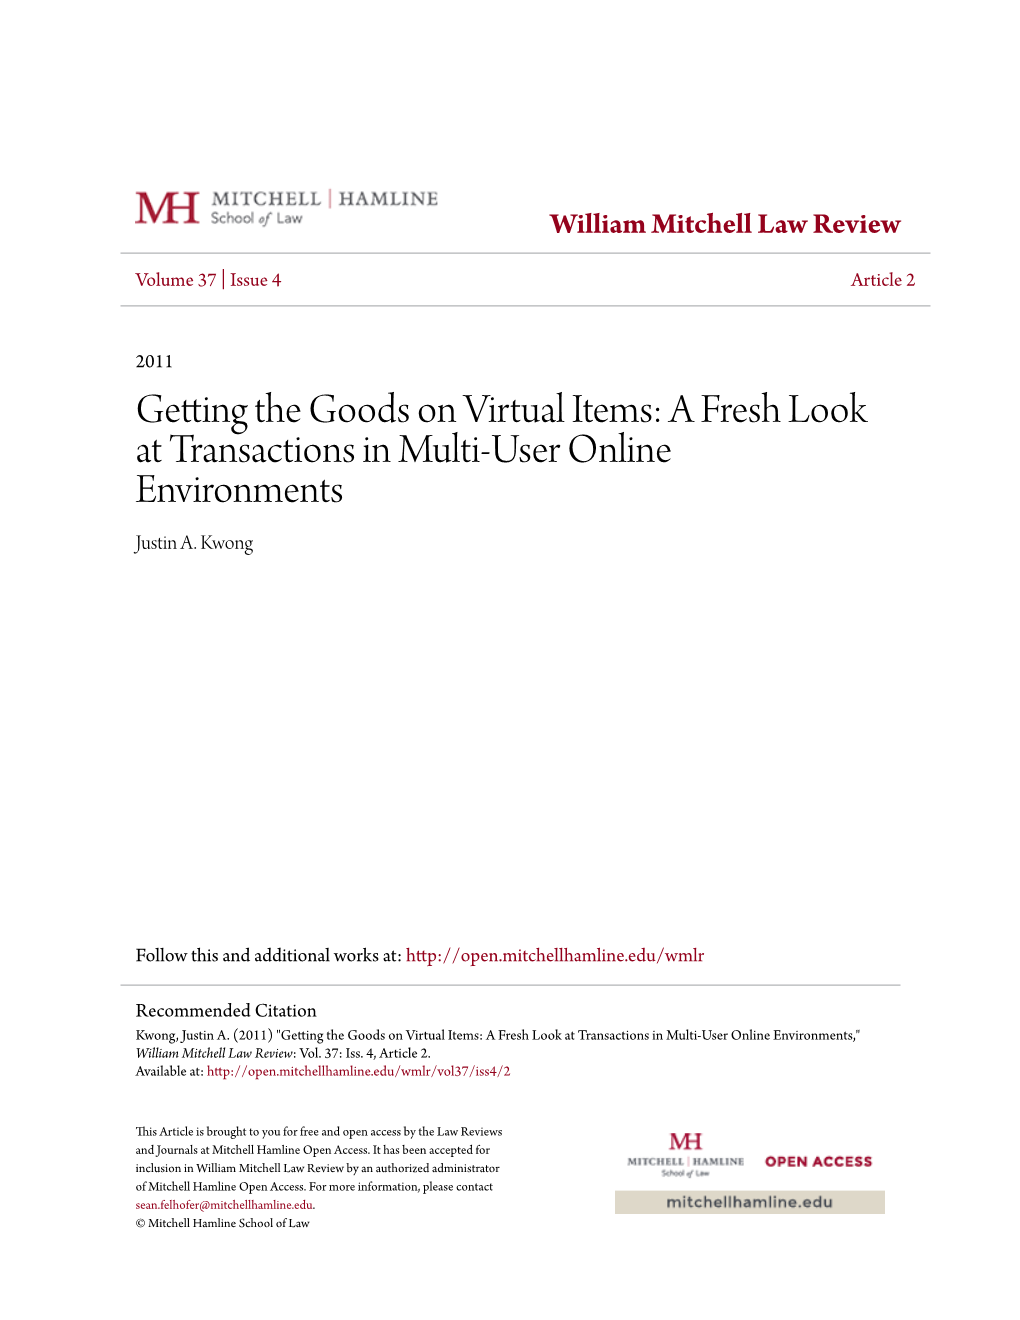 Getting the Goods on Virtual Items: a Fresh Look at Transactions in Multi-User Online Environments Justin A